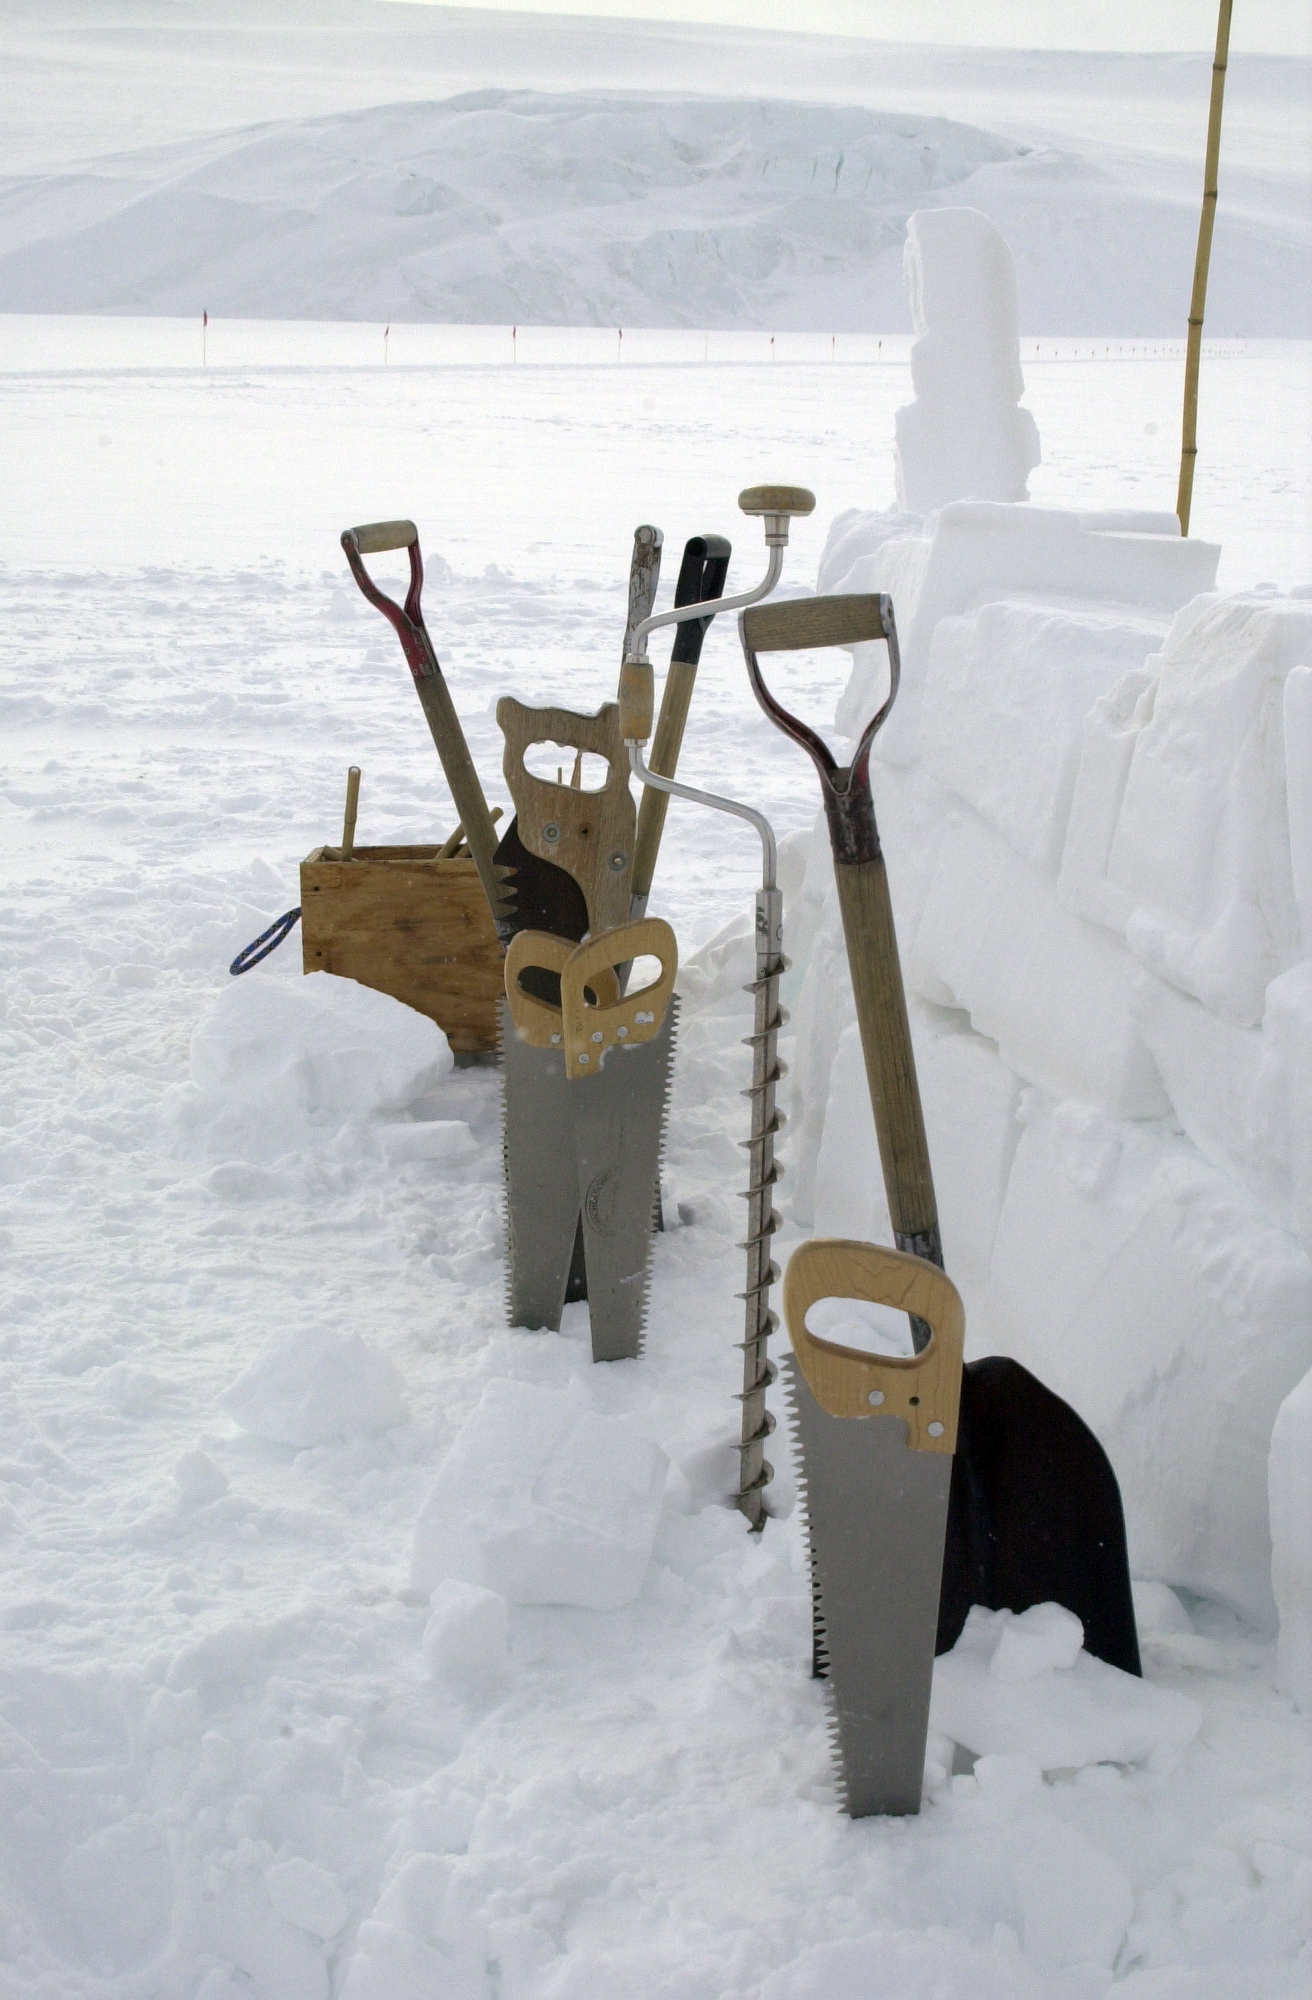 Saws, drills and shovels in the snow.